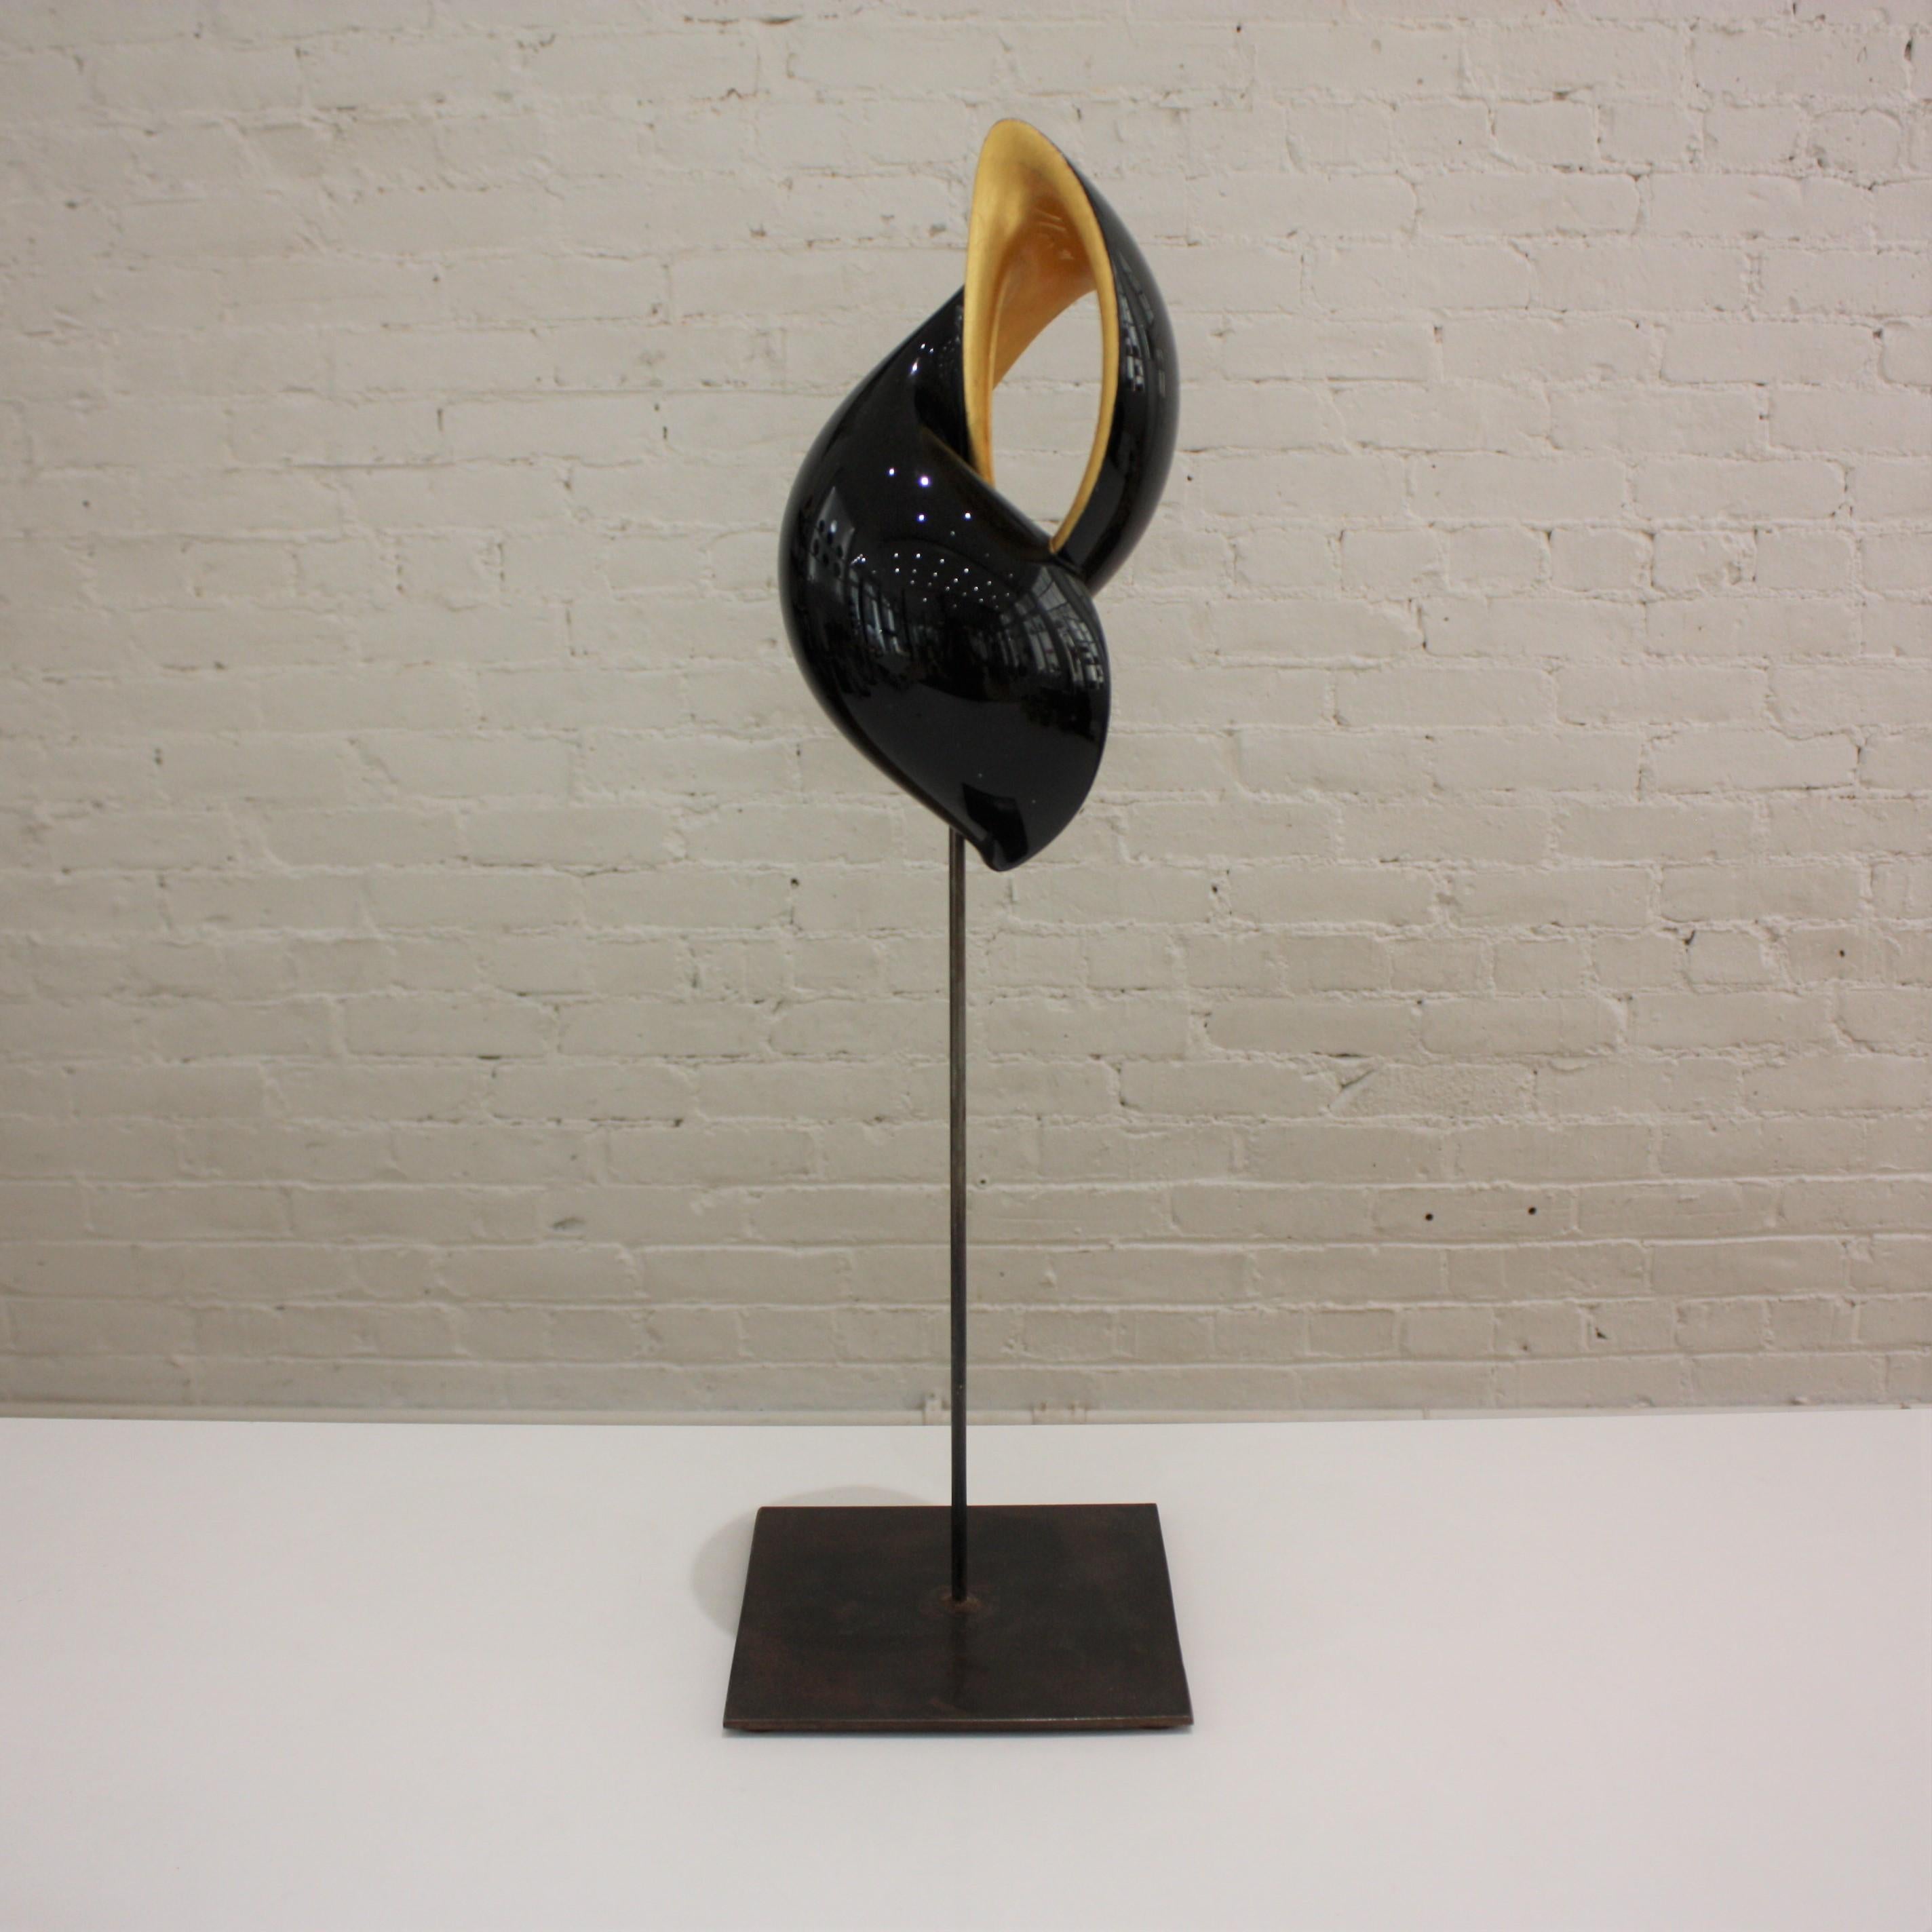 Laquered Wood and Gold Shell Sculpture, Turitella 03M 1